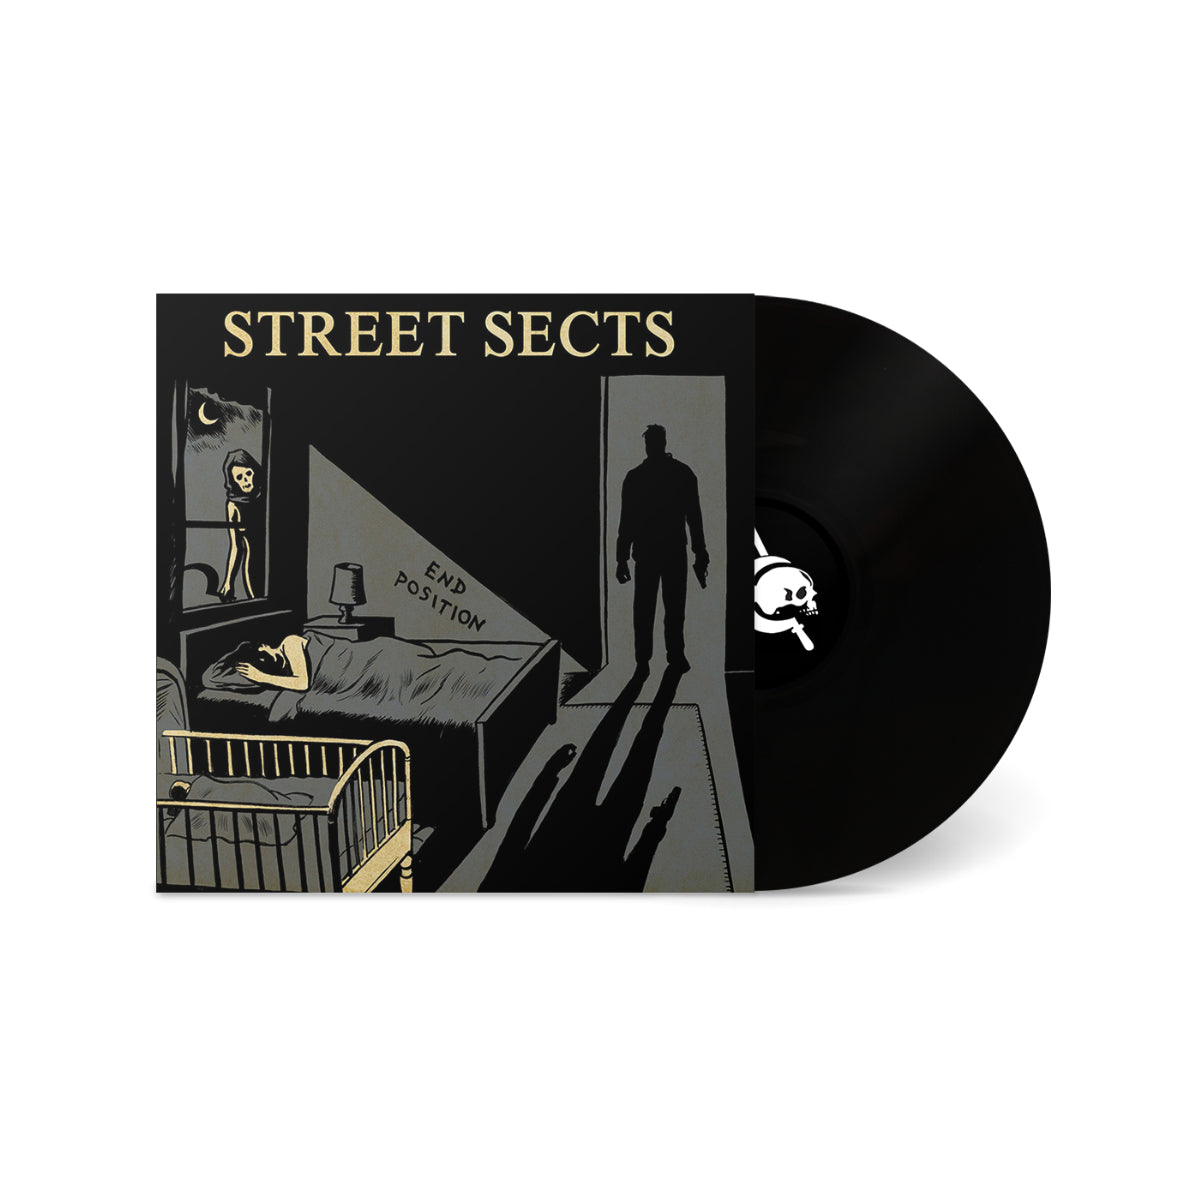 STREET SECTS "End Position"